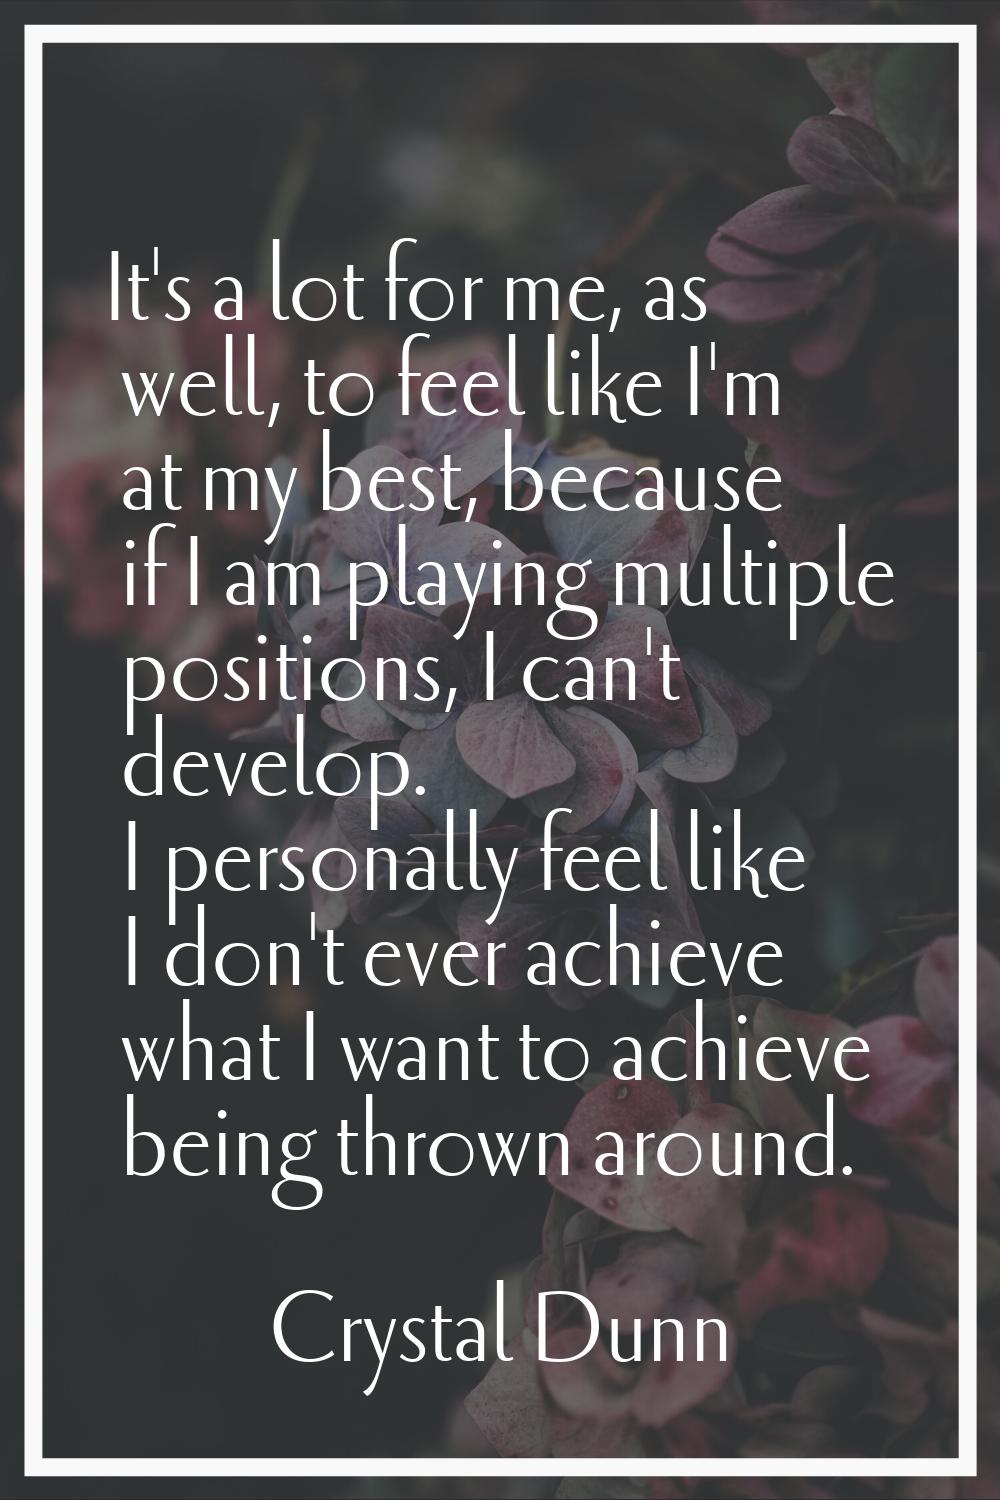 It's a lot for me, as well, to feel like I'm at my best, because if I am playing multiple positions